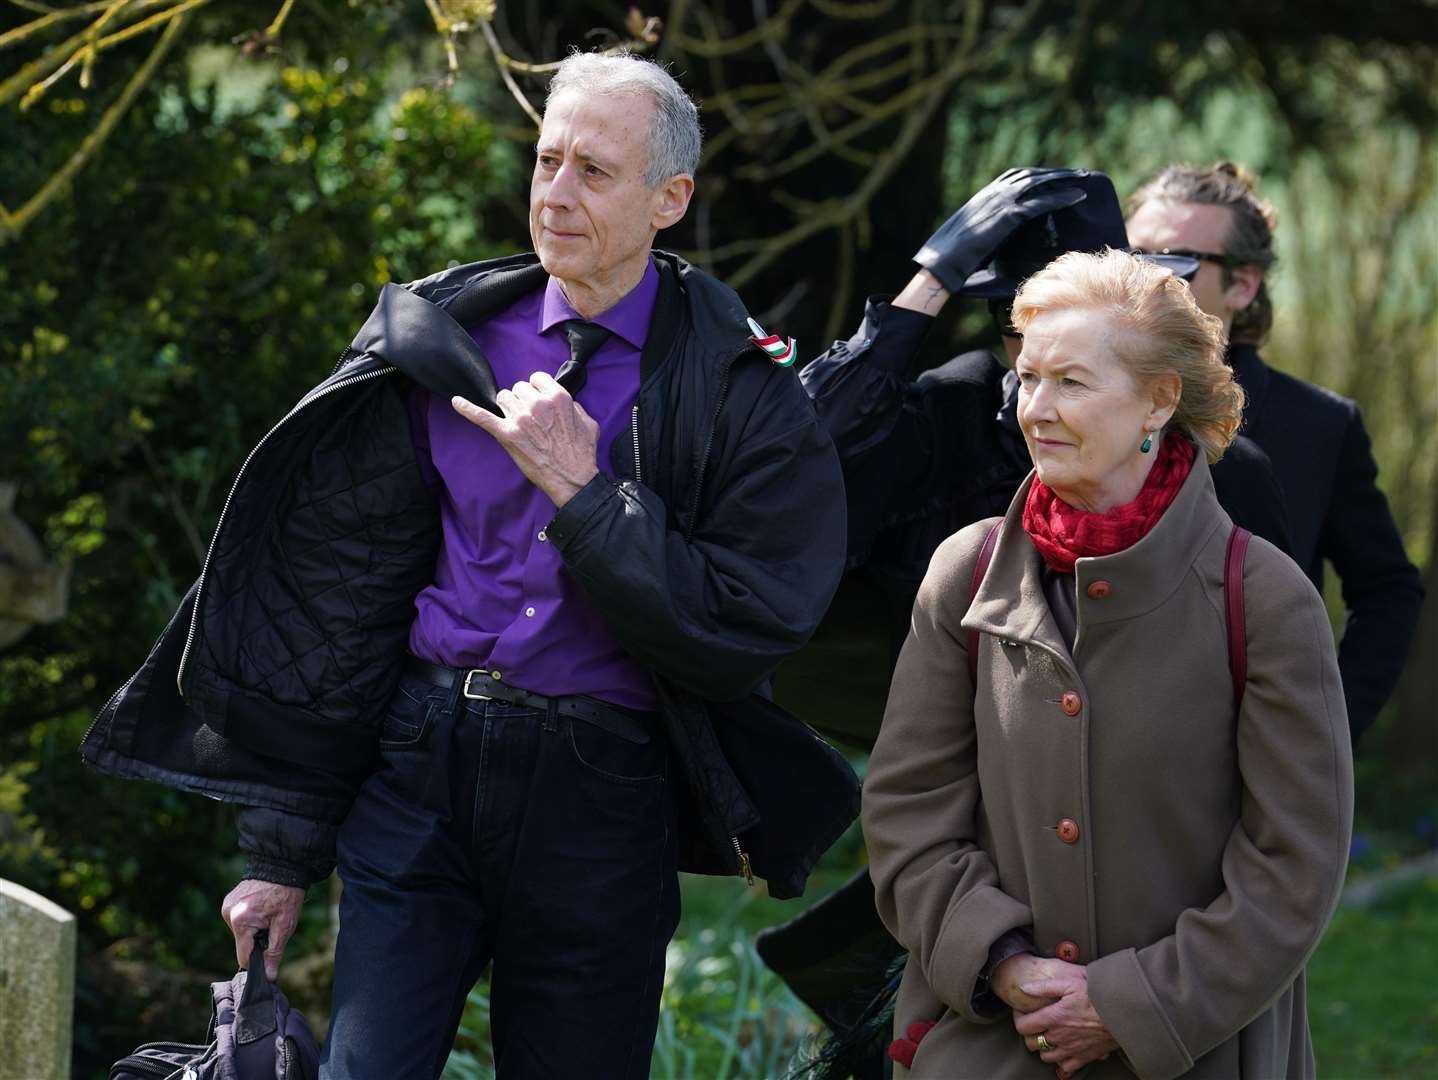 Peter Tatchell arriving for the funeral (Gareth Fuller/PA)